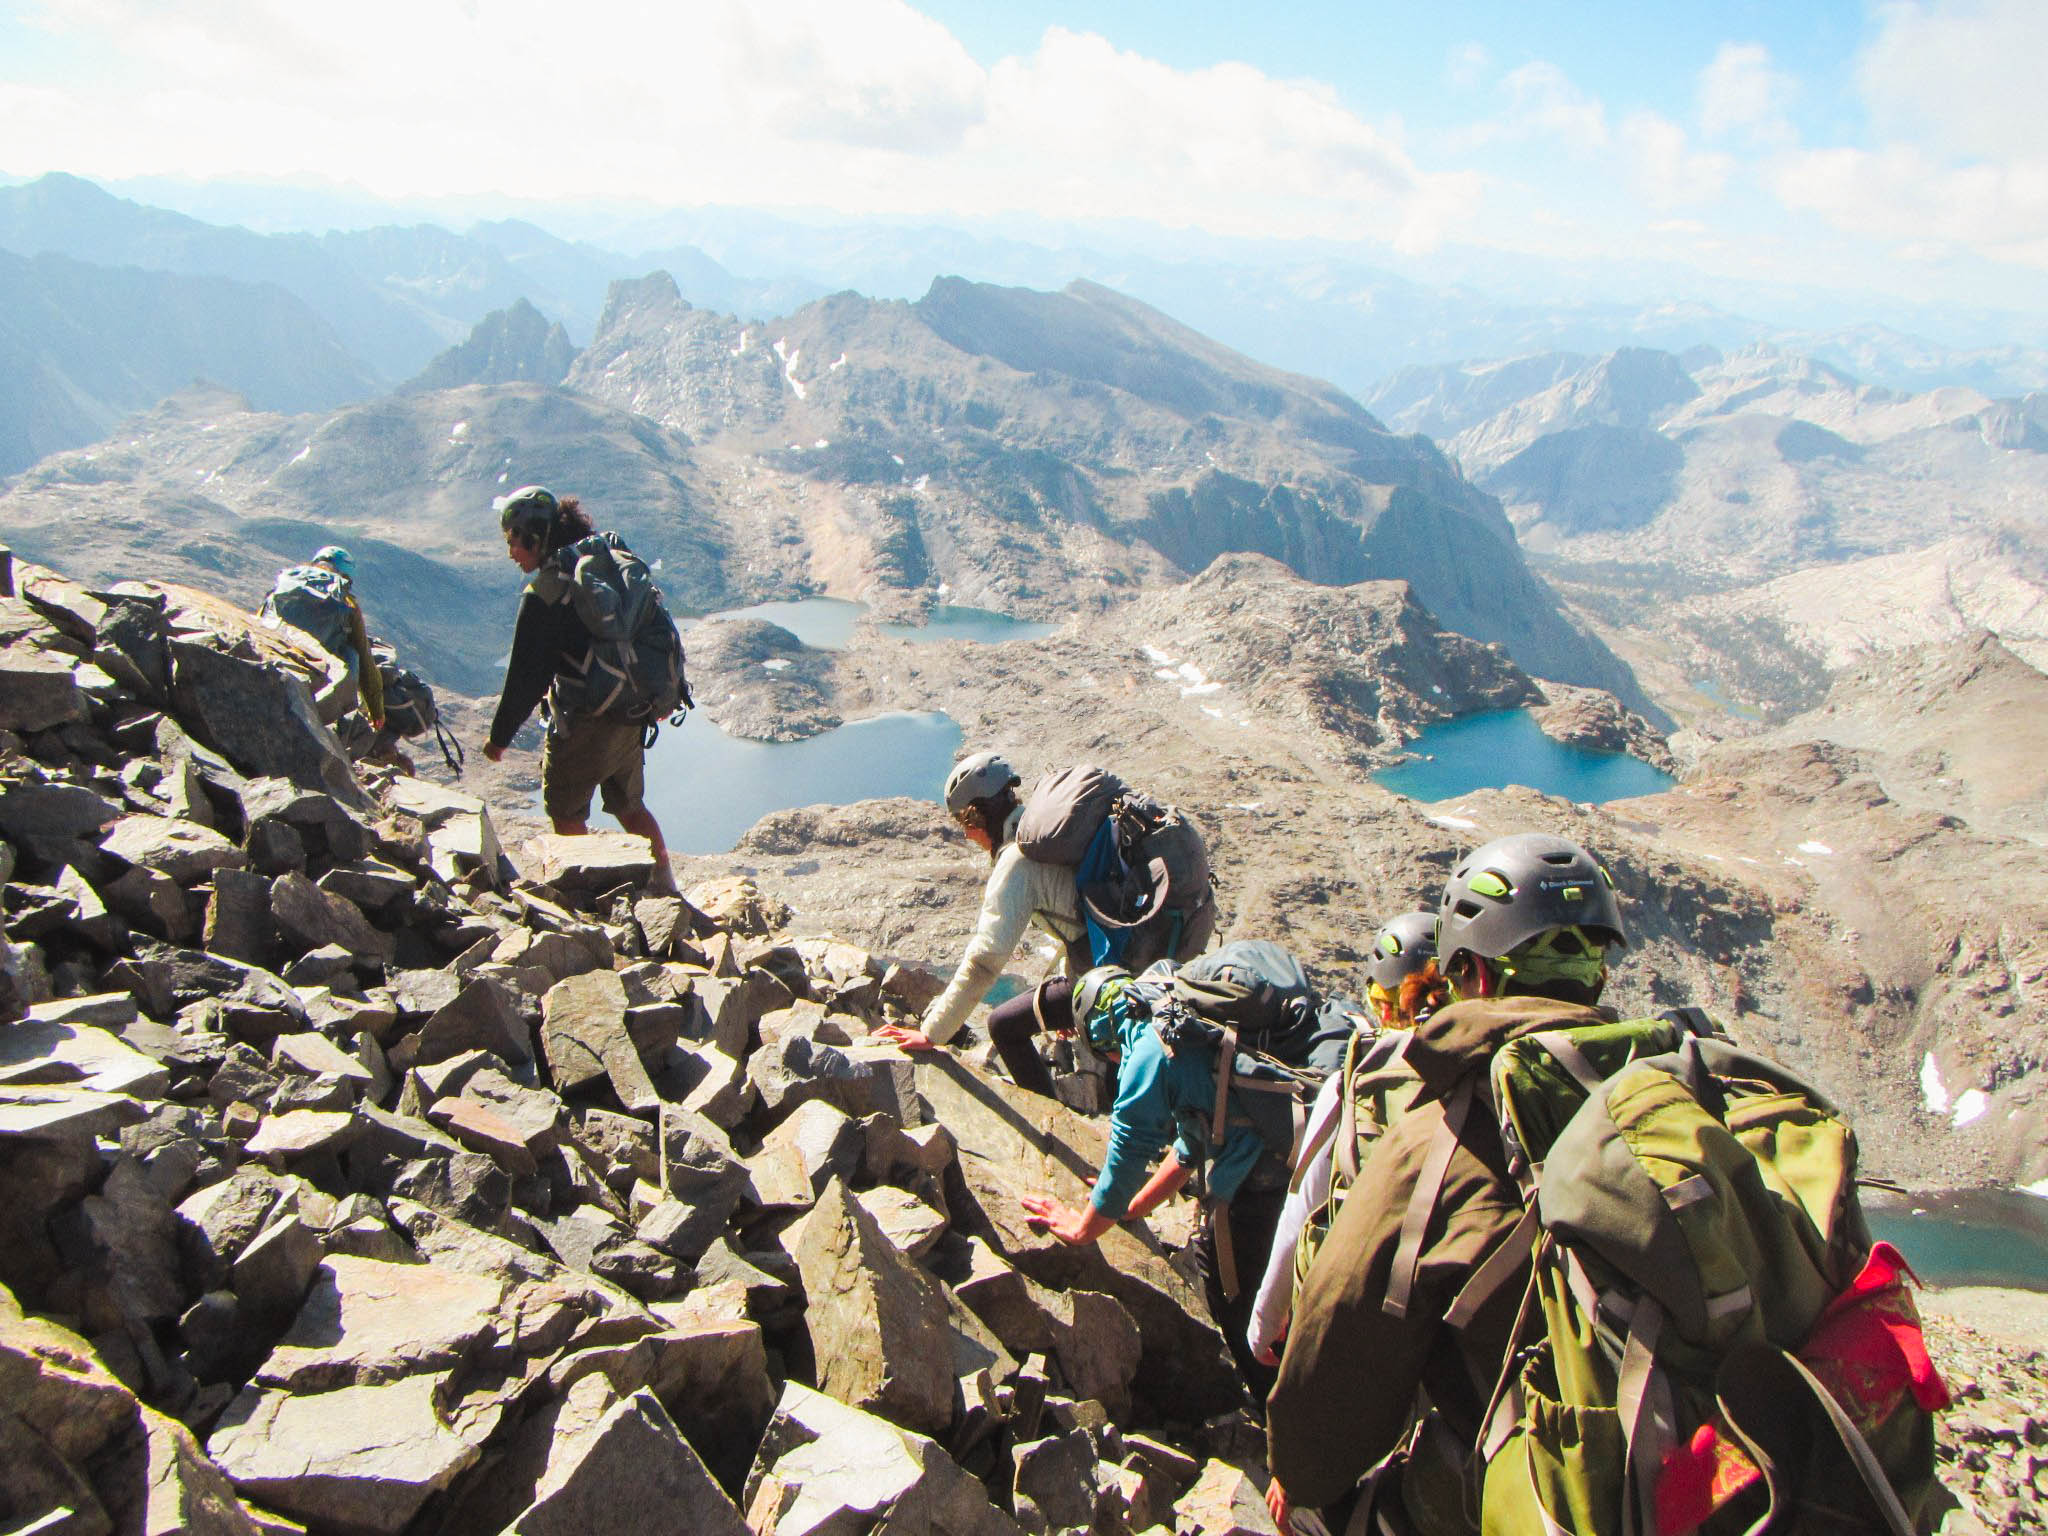 a group of six young adults with mountaineering helmets on and backpacks on scramble across rocks overlooking alpine lakes and mountains. 